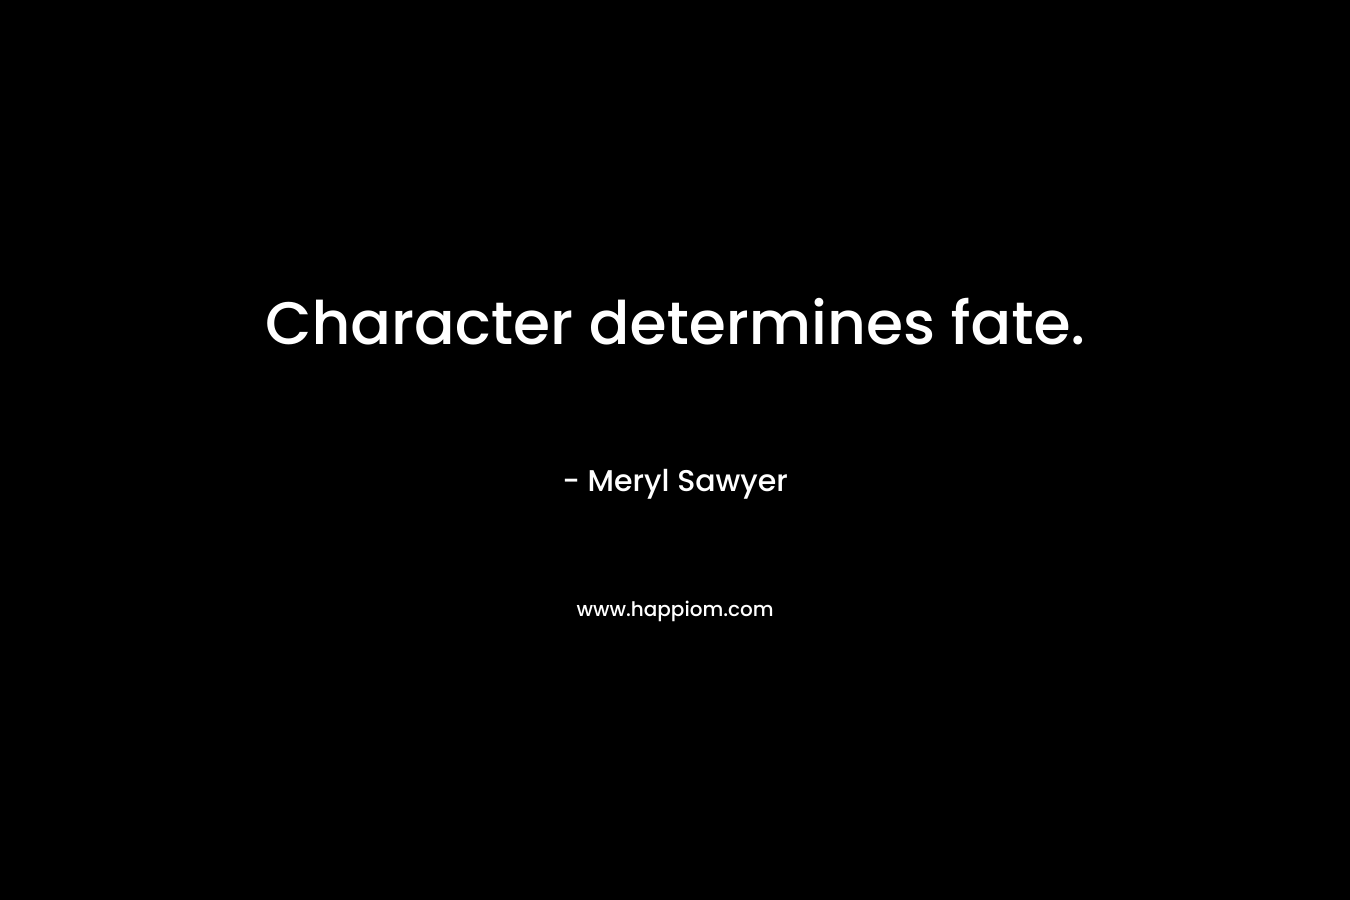 Character determines fate.